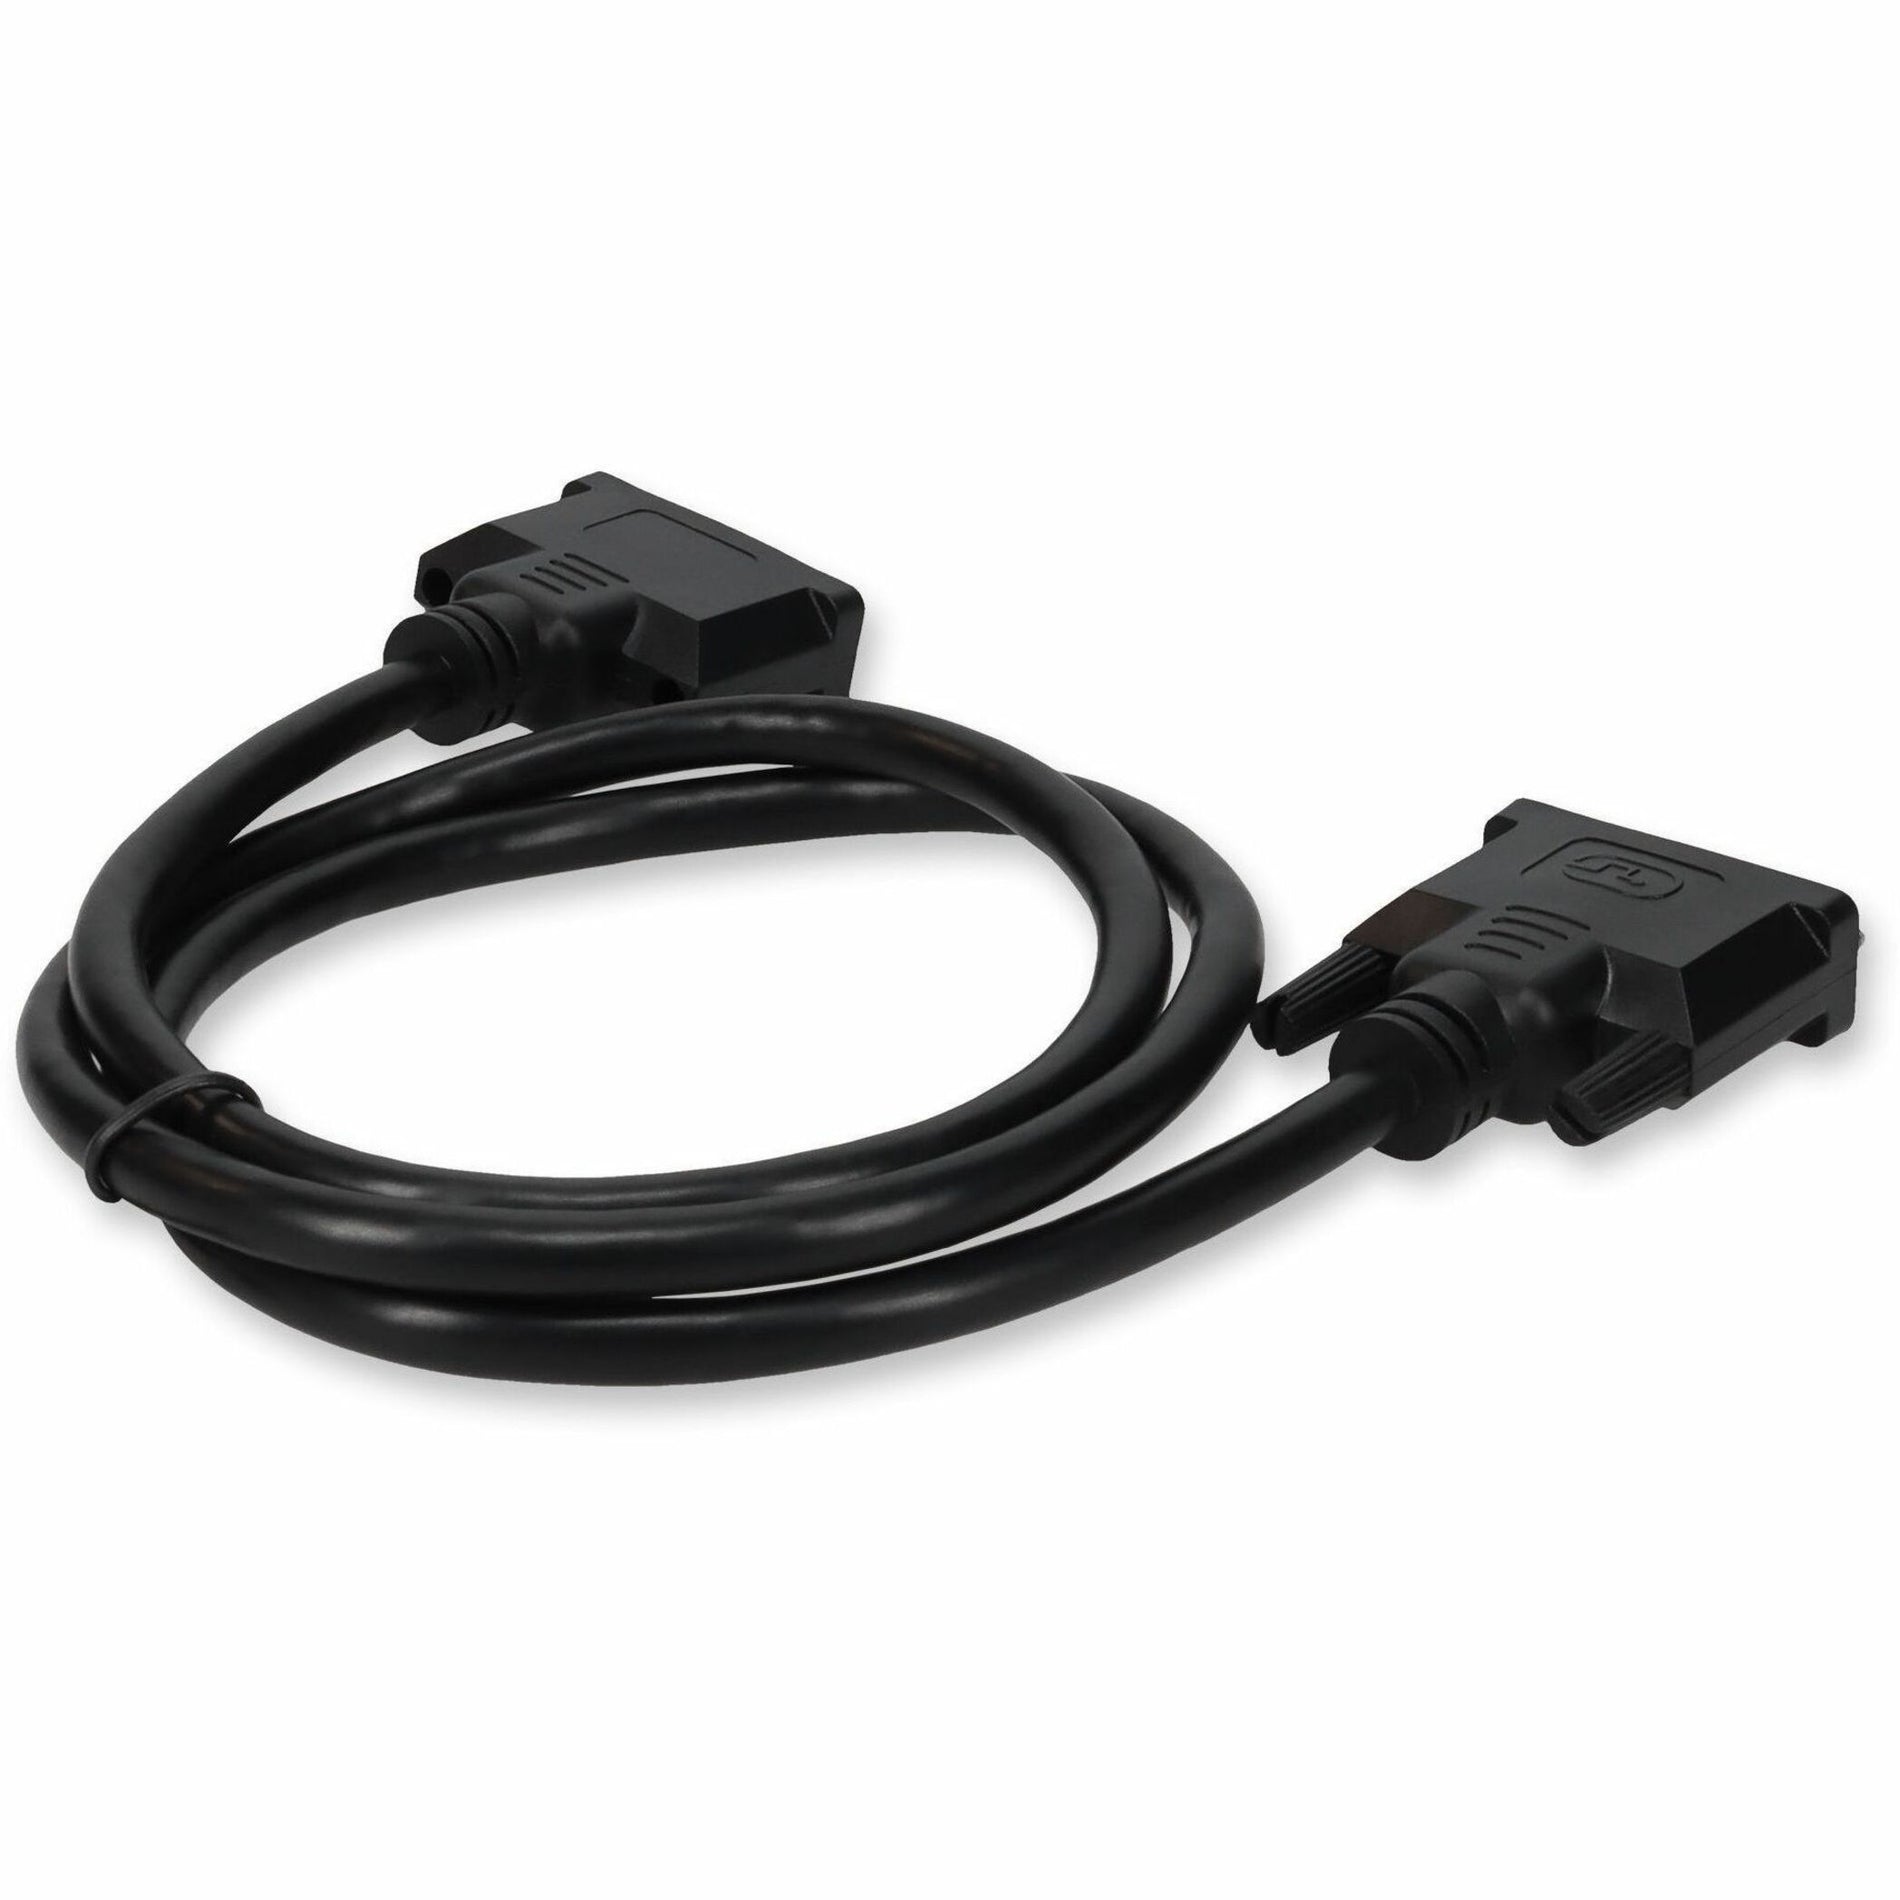 AddOn DVID2DVIDDL1F 1ft (30cm) DVI-D to DVI-D Dual Link Cable - Male to Male, Copper Conductor, 3 Year Limited Warranty